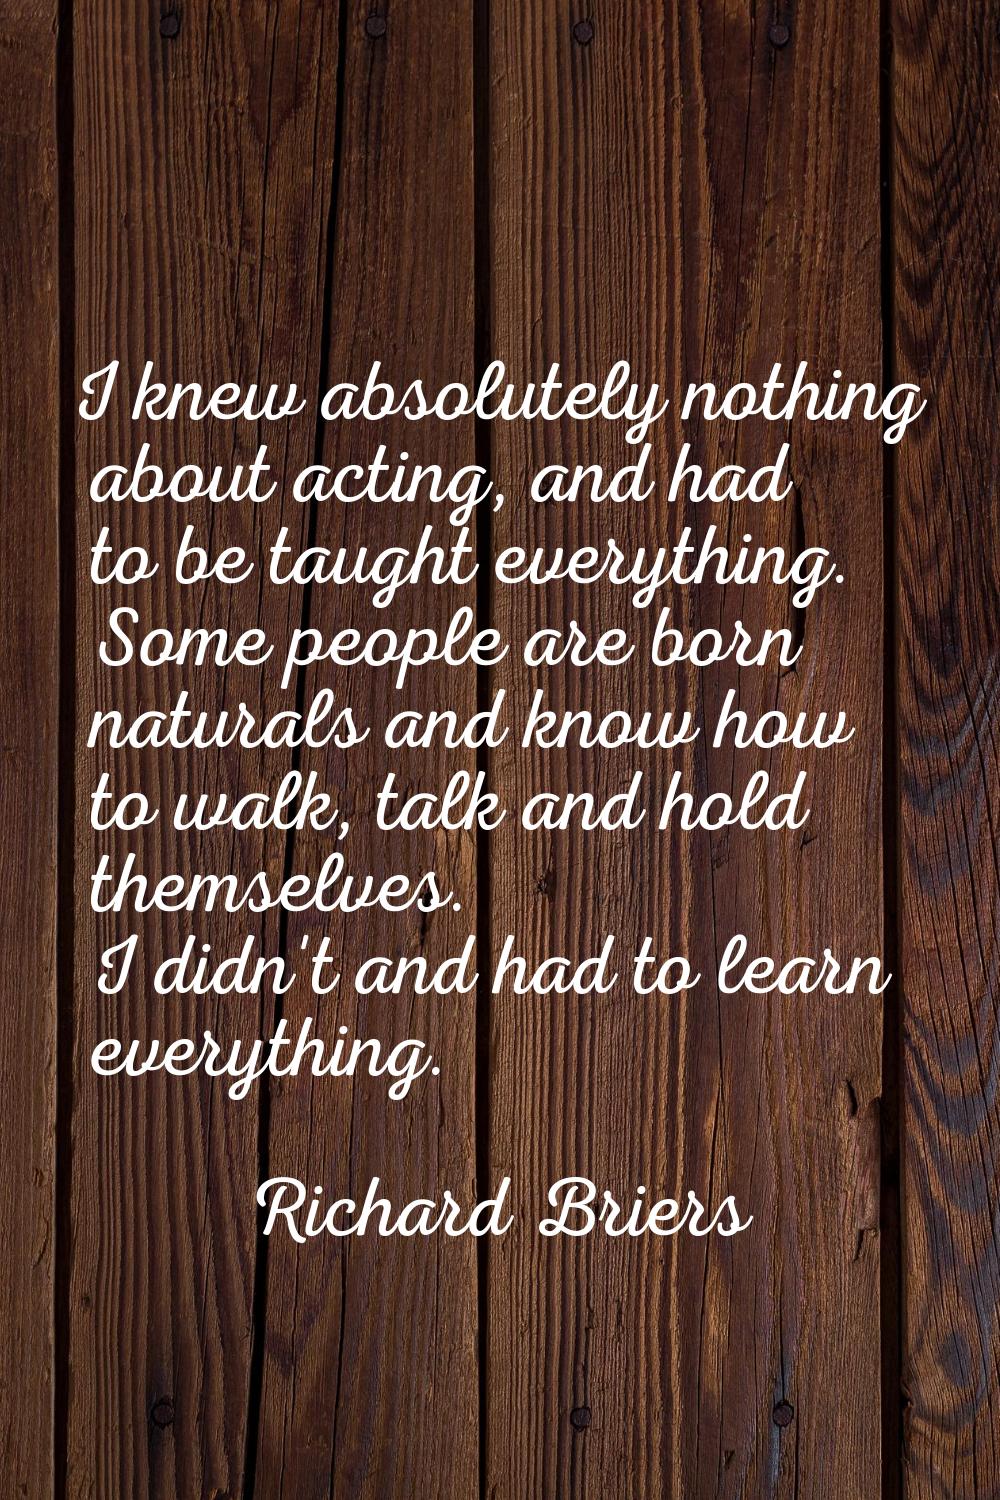 I knew absolutely nothing about acting, and had to be taught everything. Some people are born natur